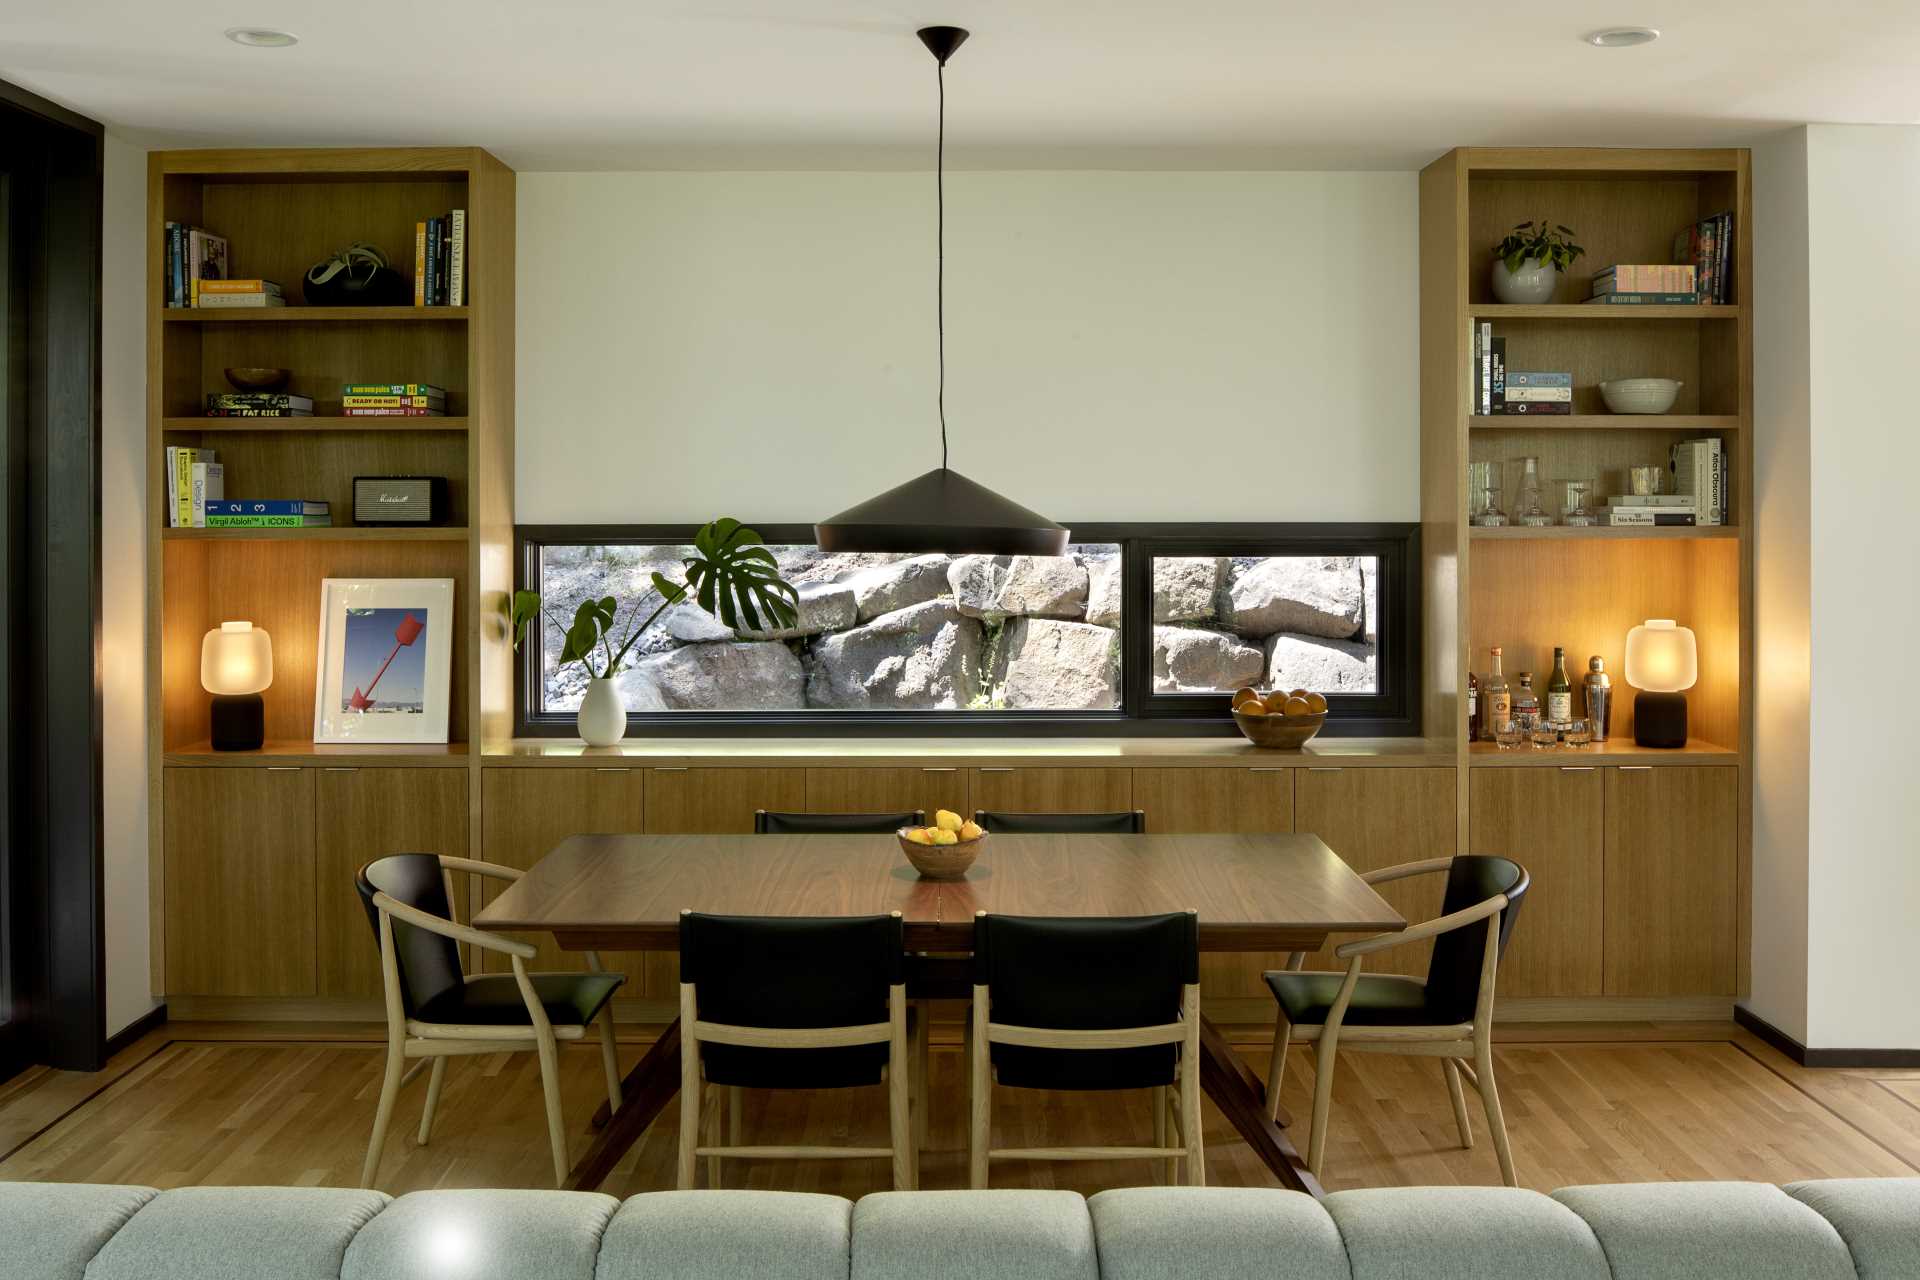 This modern dining area includes a Tom Dixon pendant lamp, as well as chairs from Antonio Citterio’s Jens collection in brushed light oak and thick embossed black leather. 